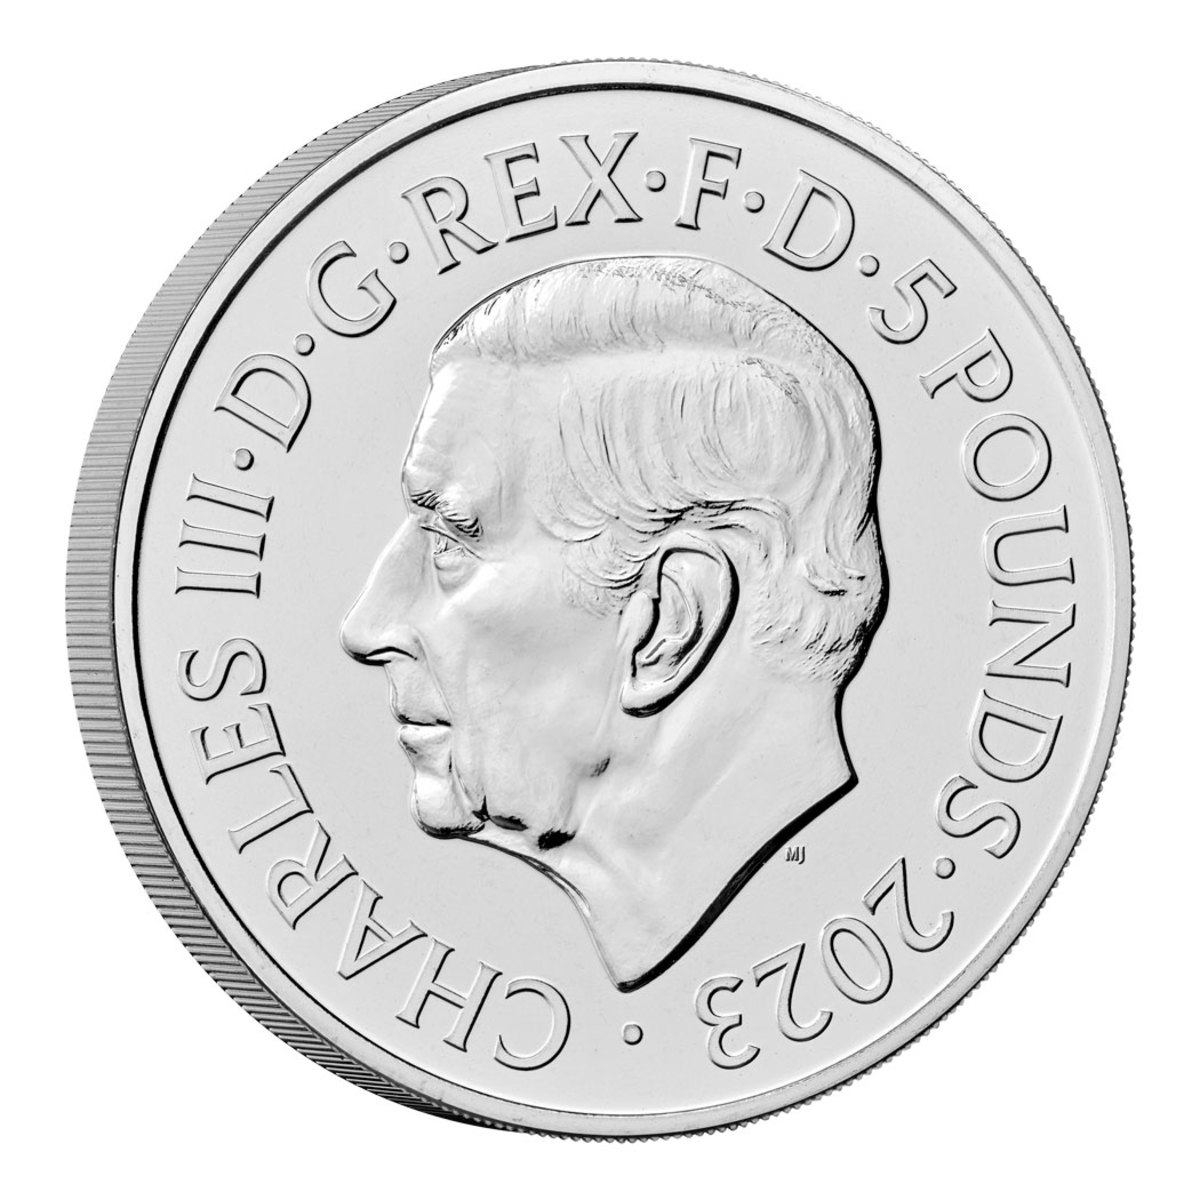 The Royal Mint Reveals First Coins of 2023 Bearing His Majesty The King's Official Coinage Portrait - Numismatic News